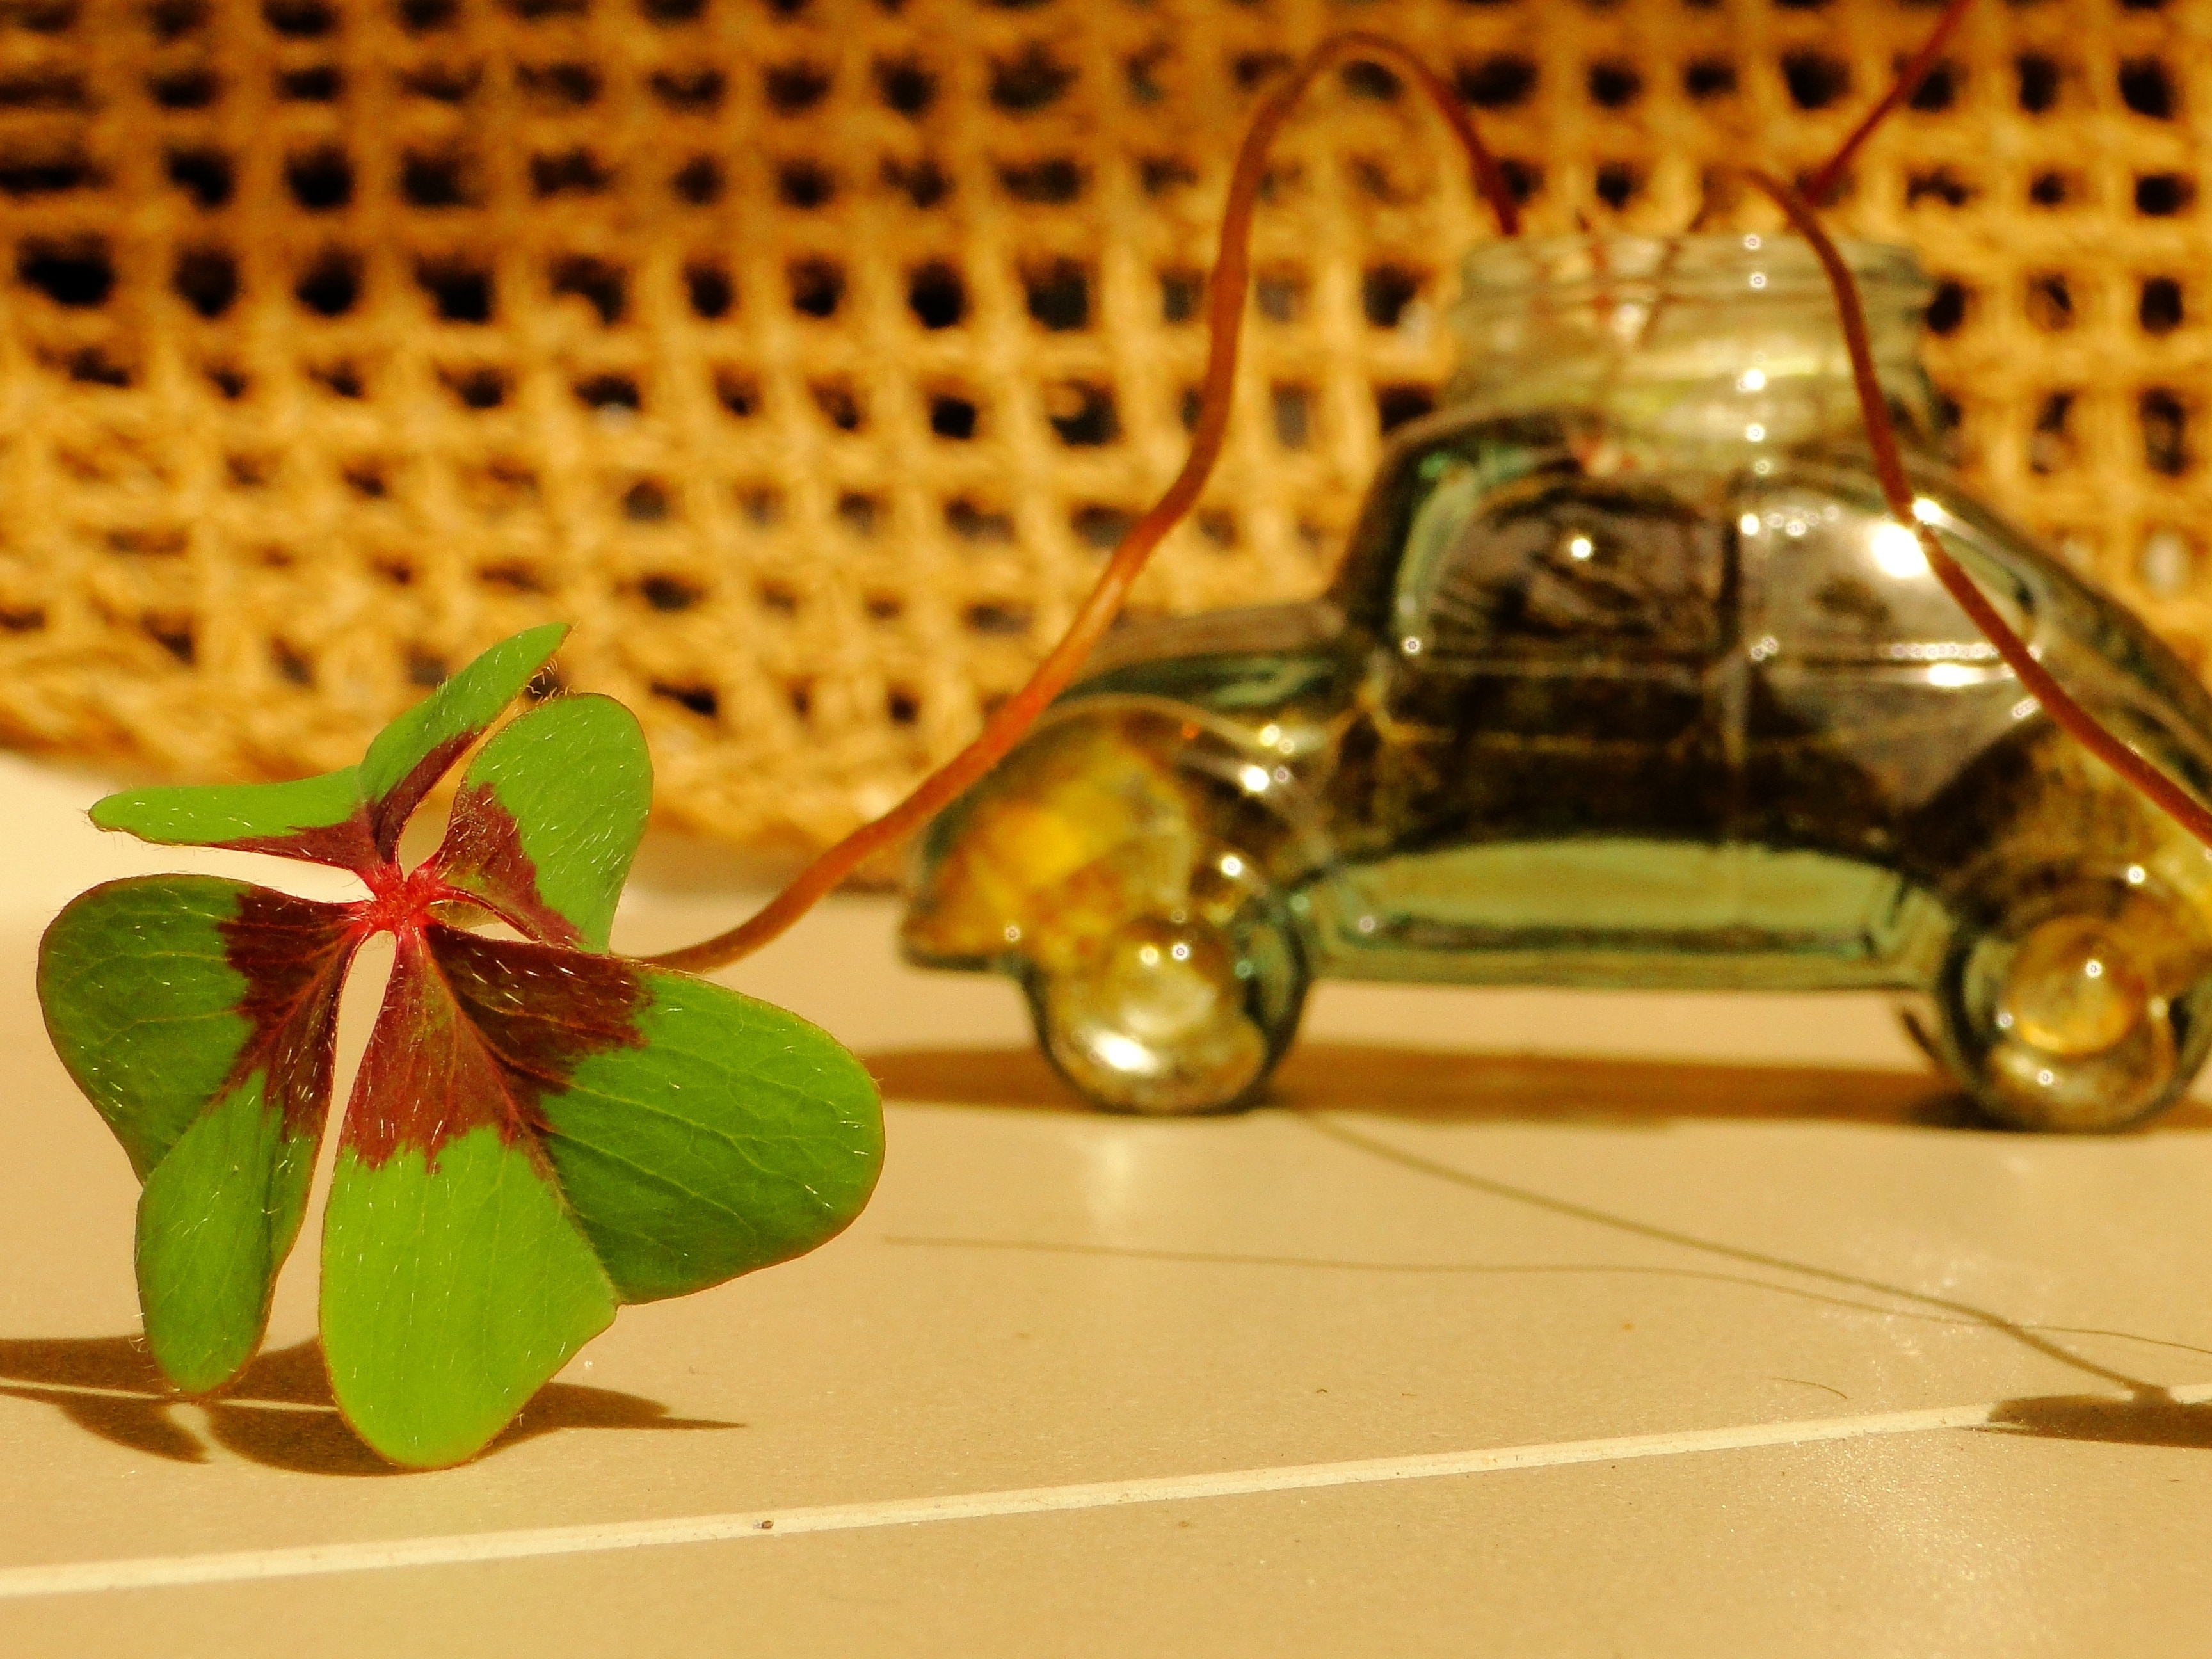 Clover, Plant, Green, Leaf, Luck, Fusca, indoors, no people